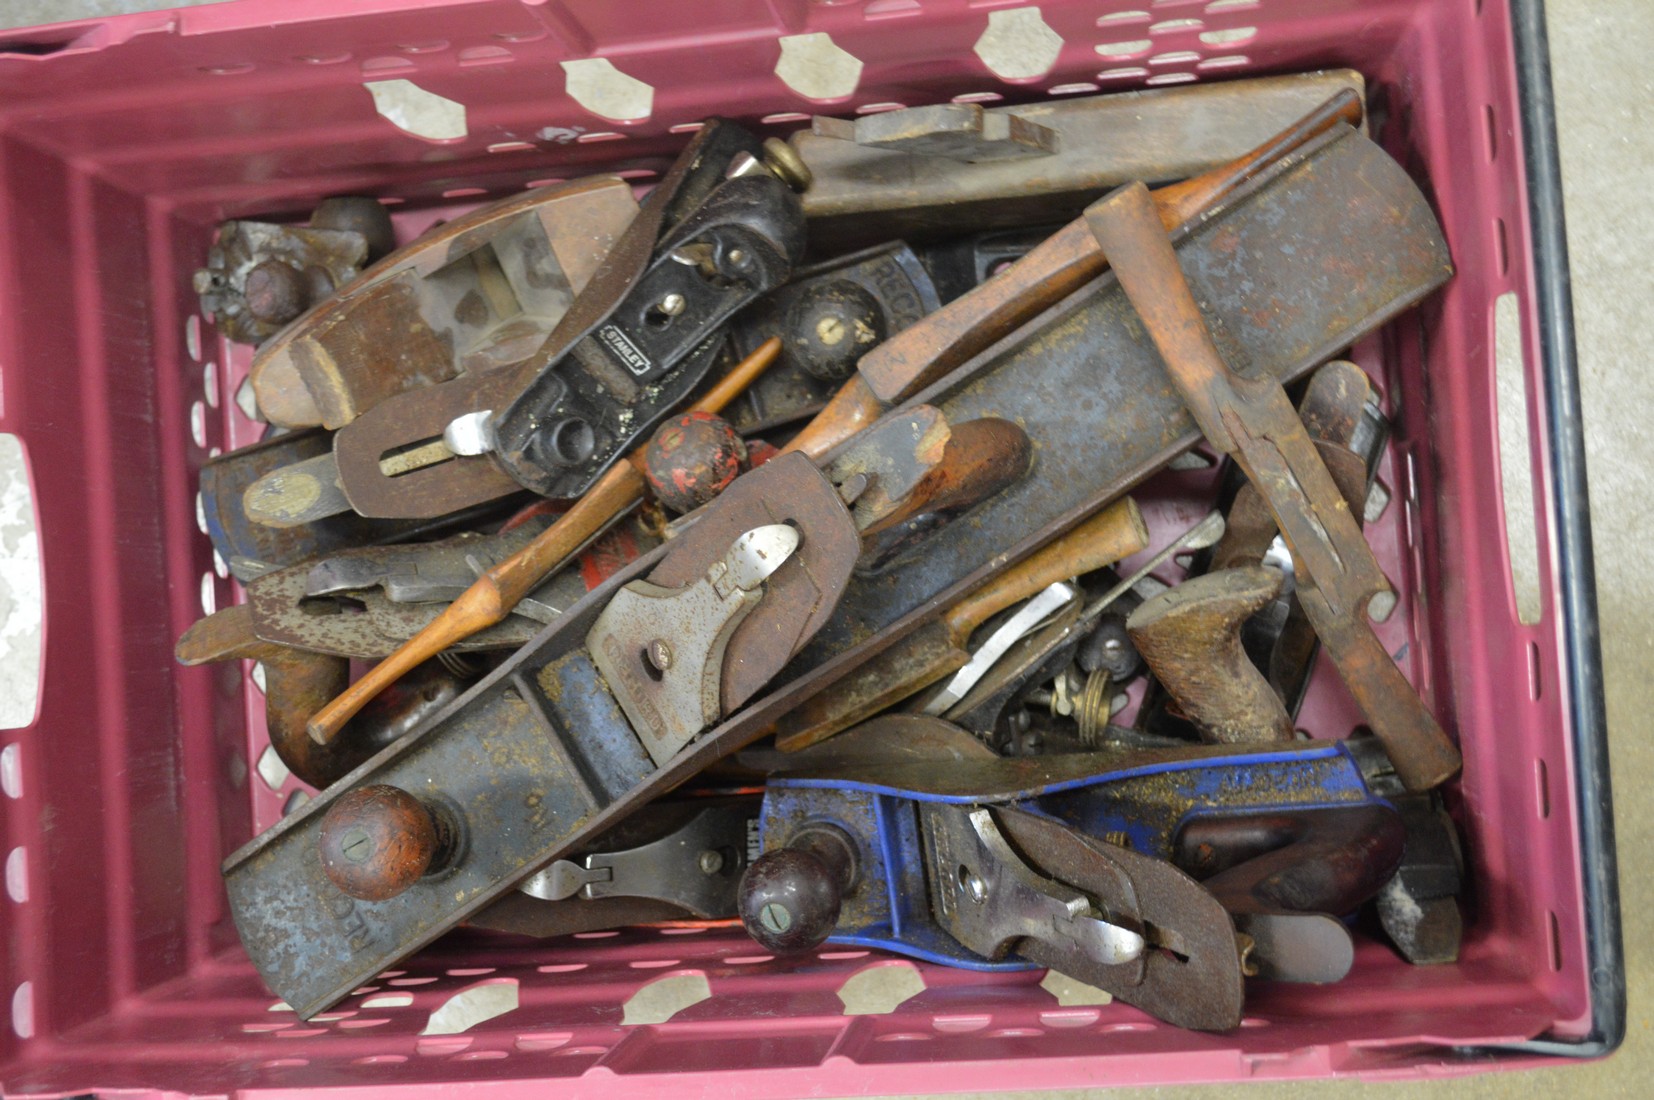 A box of wood working planes and spokeshaves.